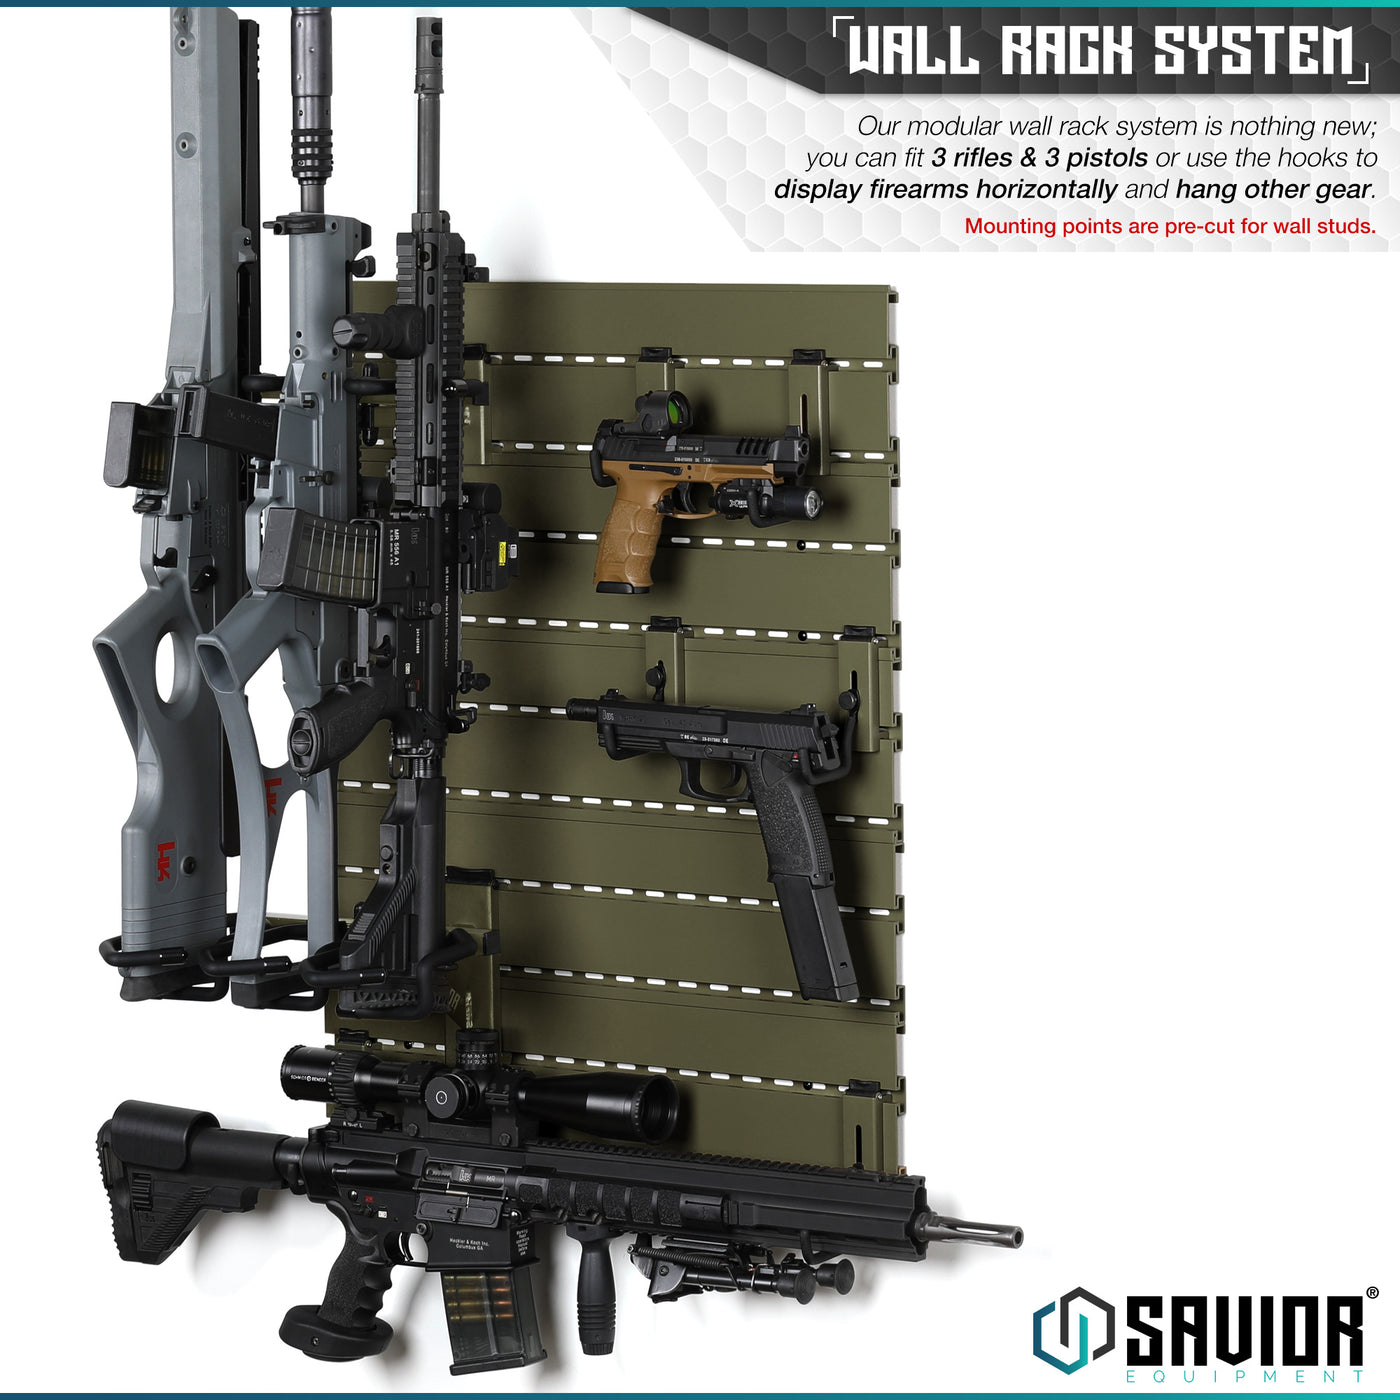 Wall Rack System - Our modular wall rack system is nothing new; you can fit up to 3 rifles & 3 pistols or use the hooks to display firearms horizontally and hang other gear. Mounting points are pre-cut for wall studs.